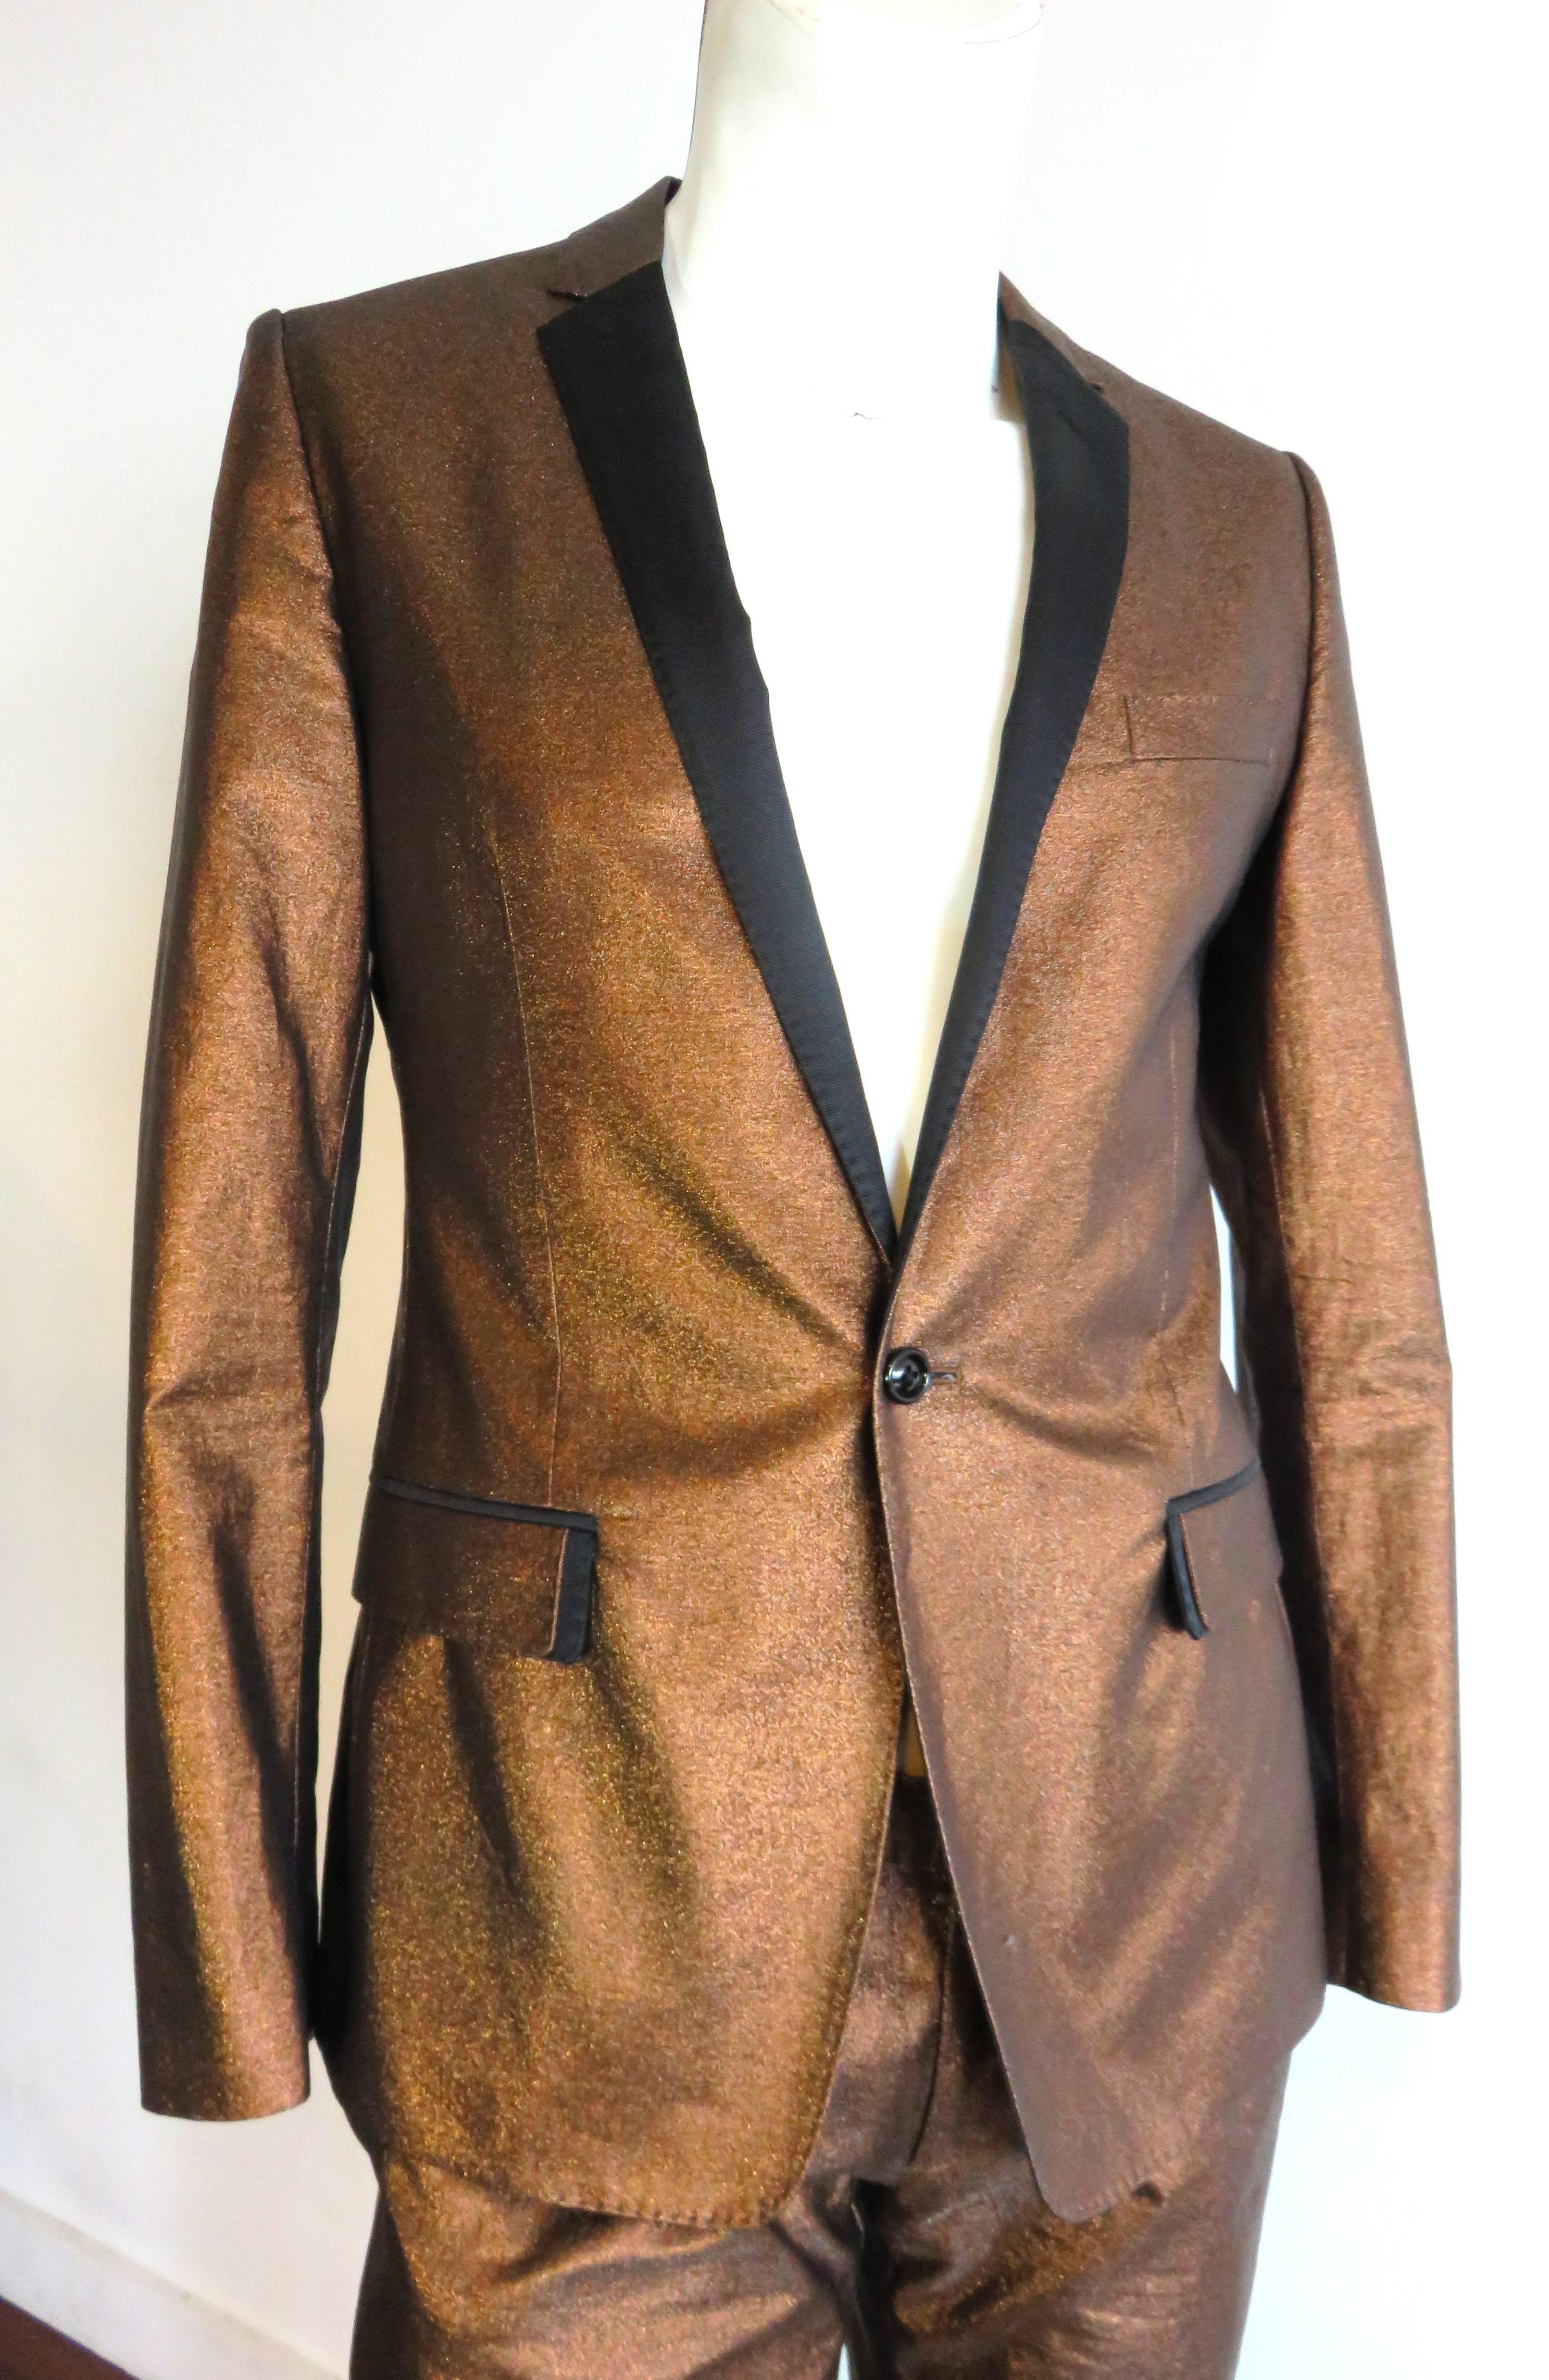 Worn once, 'like new' condition, DOLCE & GABBANA, men's, metallic bronze tuxedo.

Handsome tuxedo jacket and pant set in a 'shimmer' effect, metallic bronze fabrication.  

Contrast black twill lapels, front, double-flap, pocket detail, and side